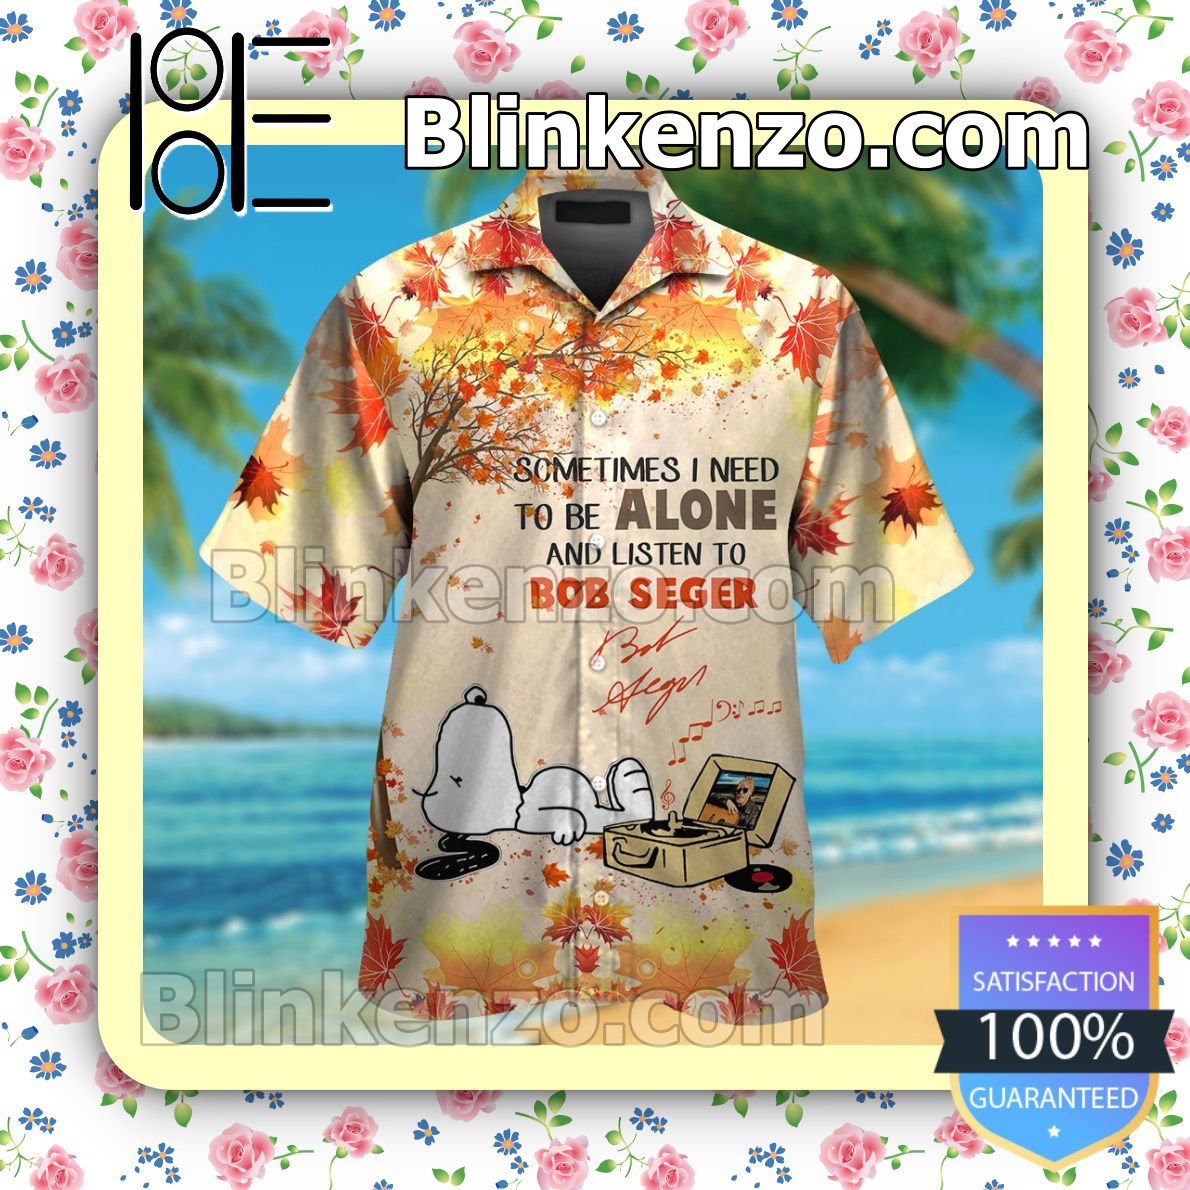 To Be Alone And Listen To Bob Seger Mens Shirt, Swim Trunk